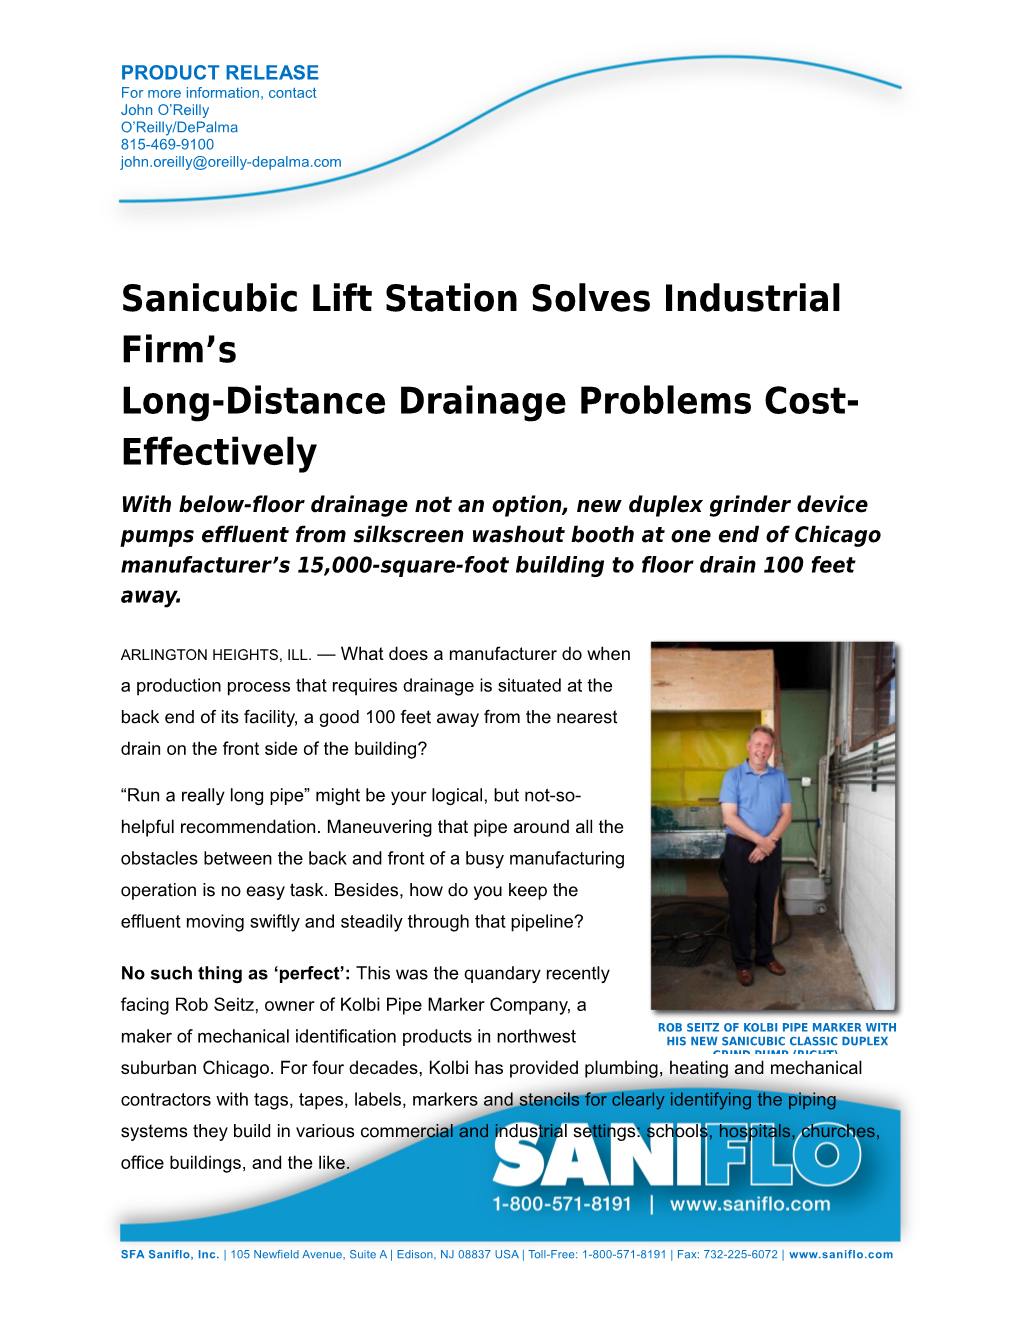 Sanicubic Lift Station Solves Industrial Firm S